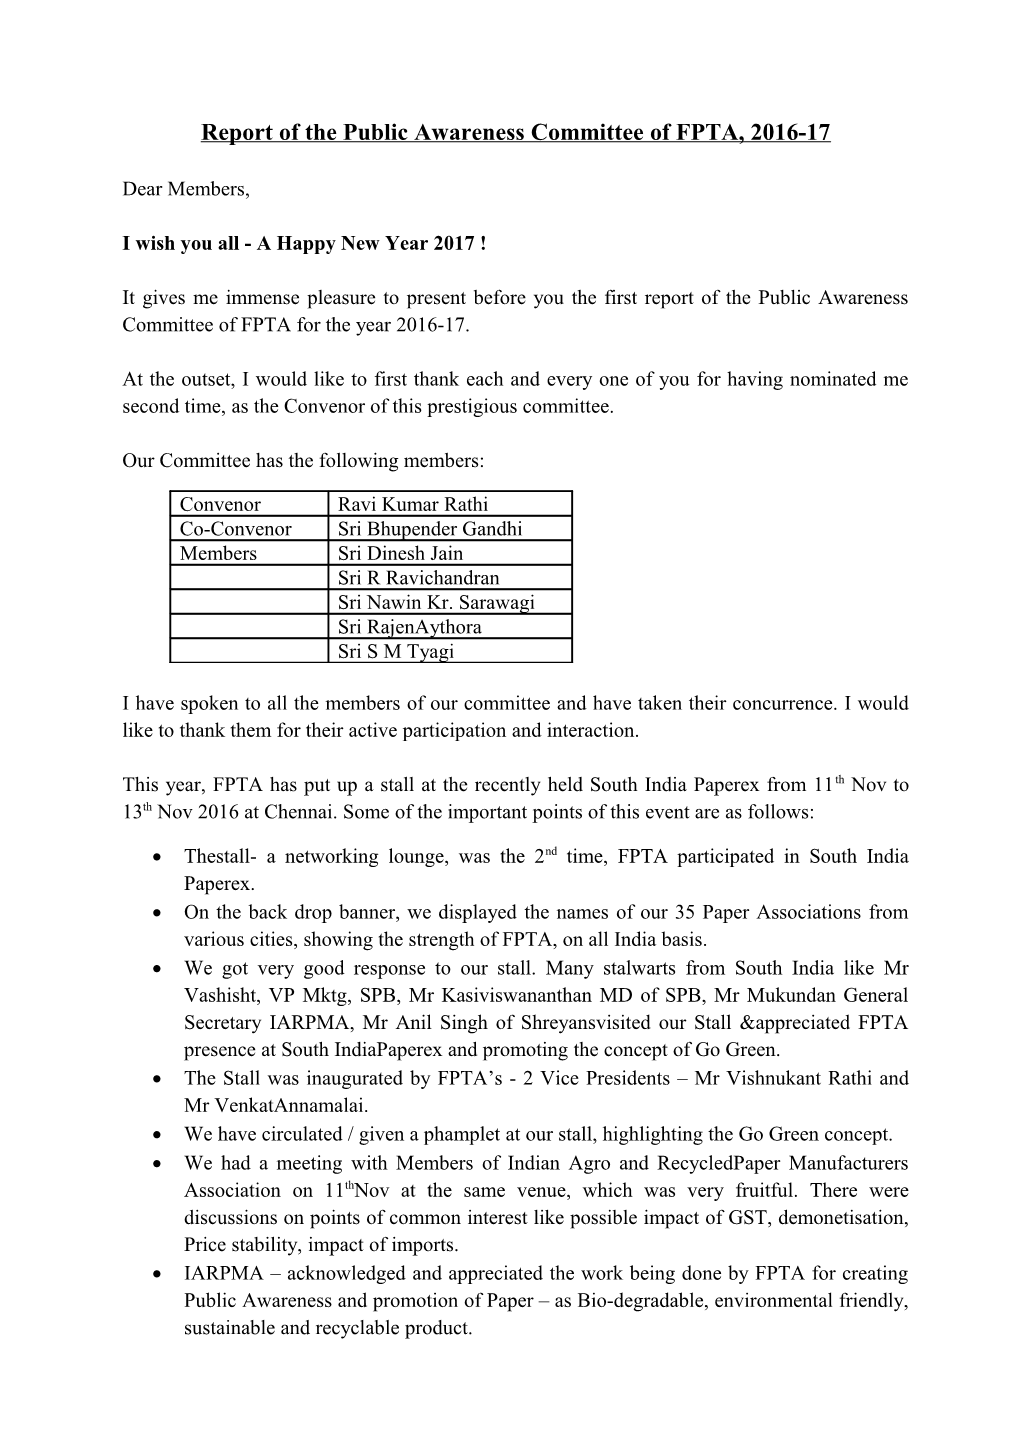 Report of the Public Awareness Committee of FPTA, 2016-17